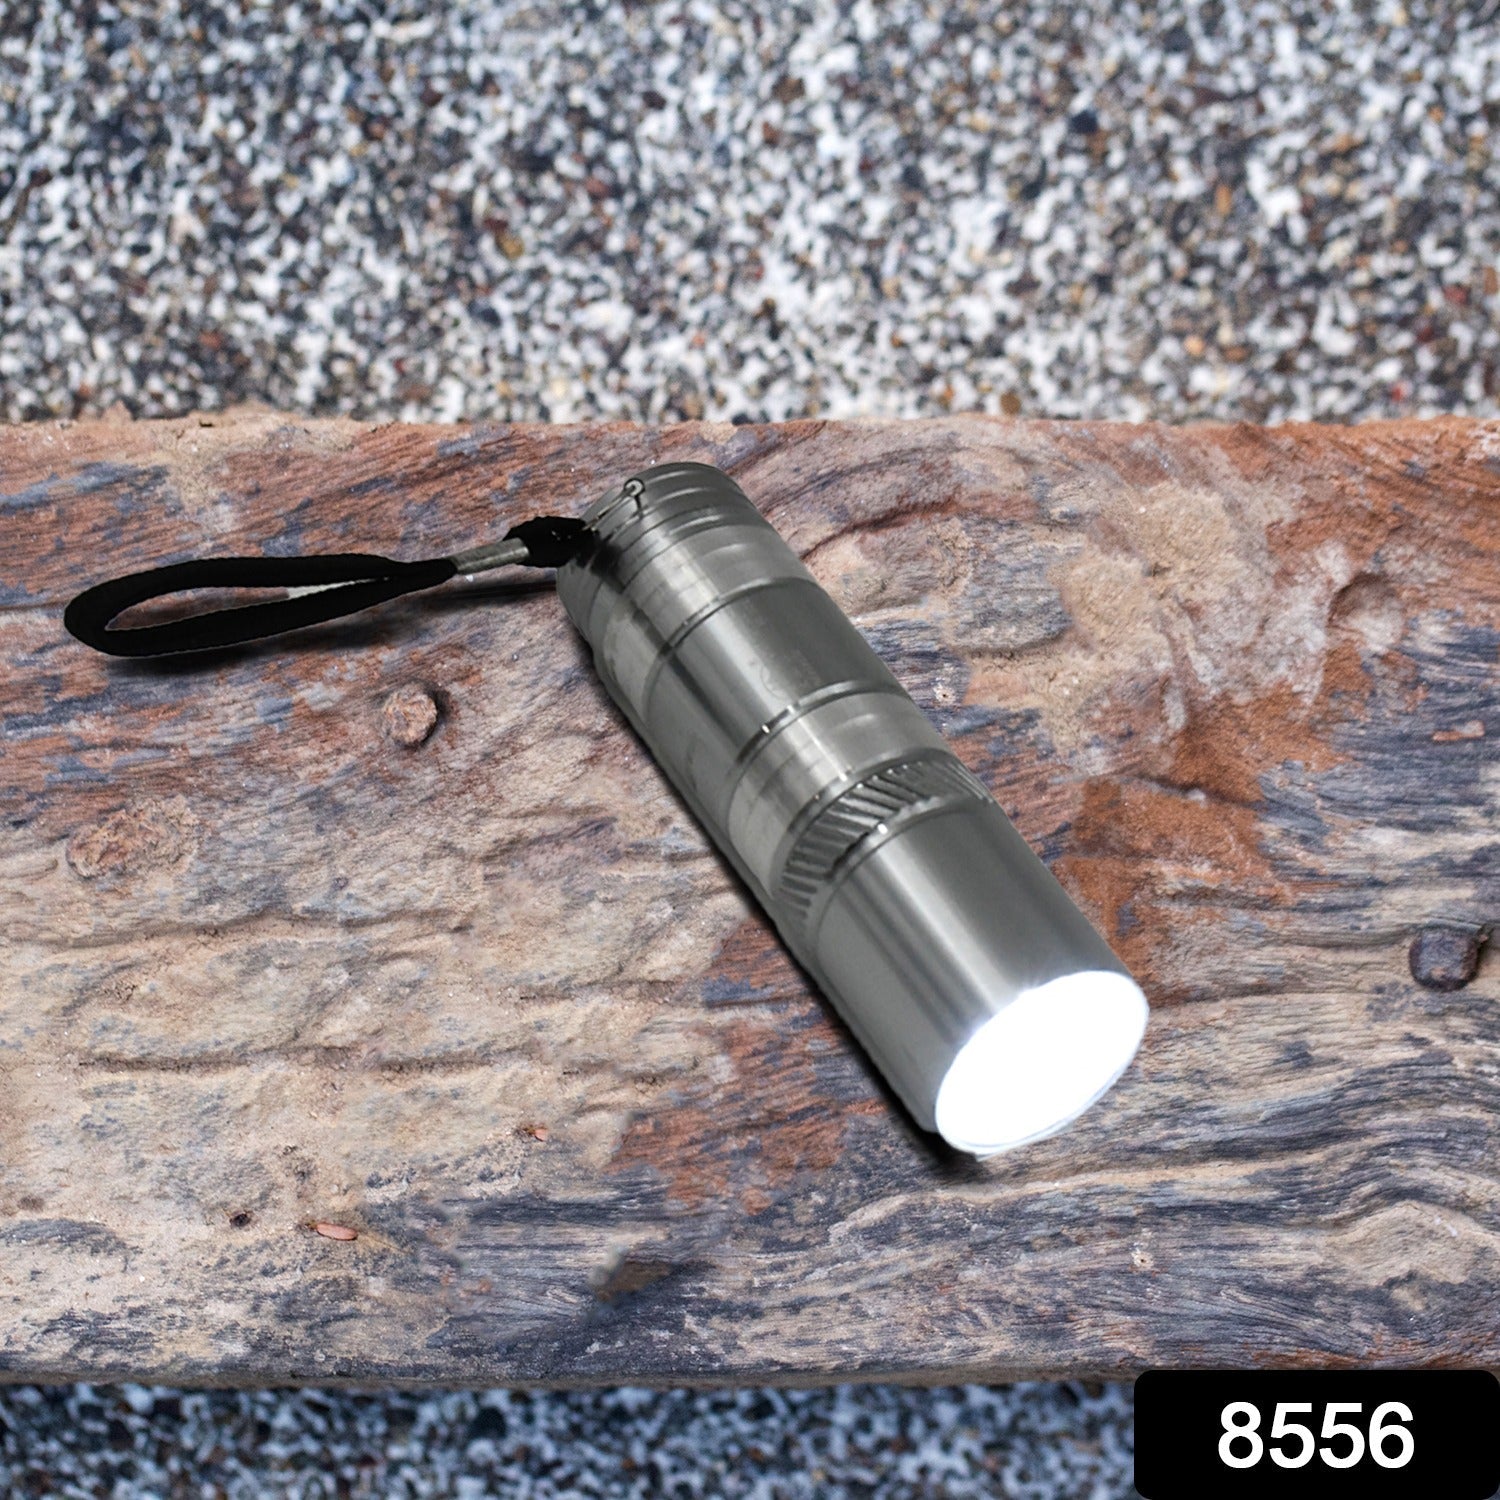 Portable Mini Torch / Flashlight 9 LED Powerful High Lumens Pen Light Easy To Carry, Portable Pocket Compact Torch for Emergency 3 Battery operated (Battery not included / 1 pc)